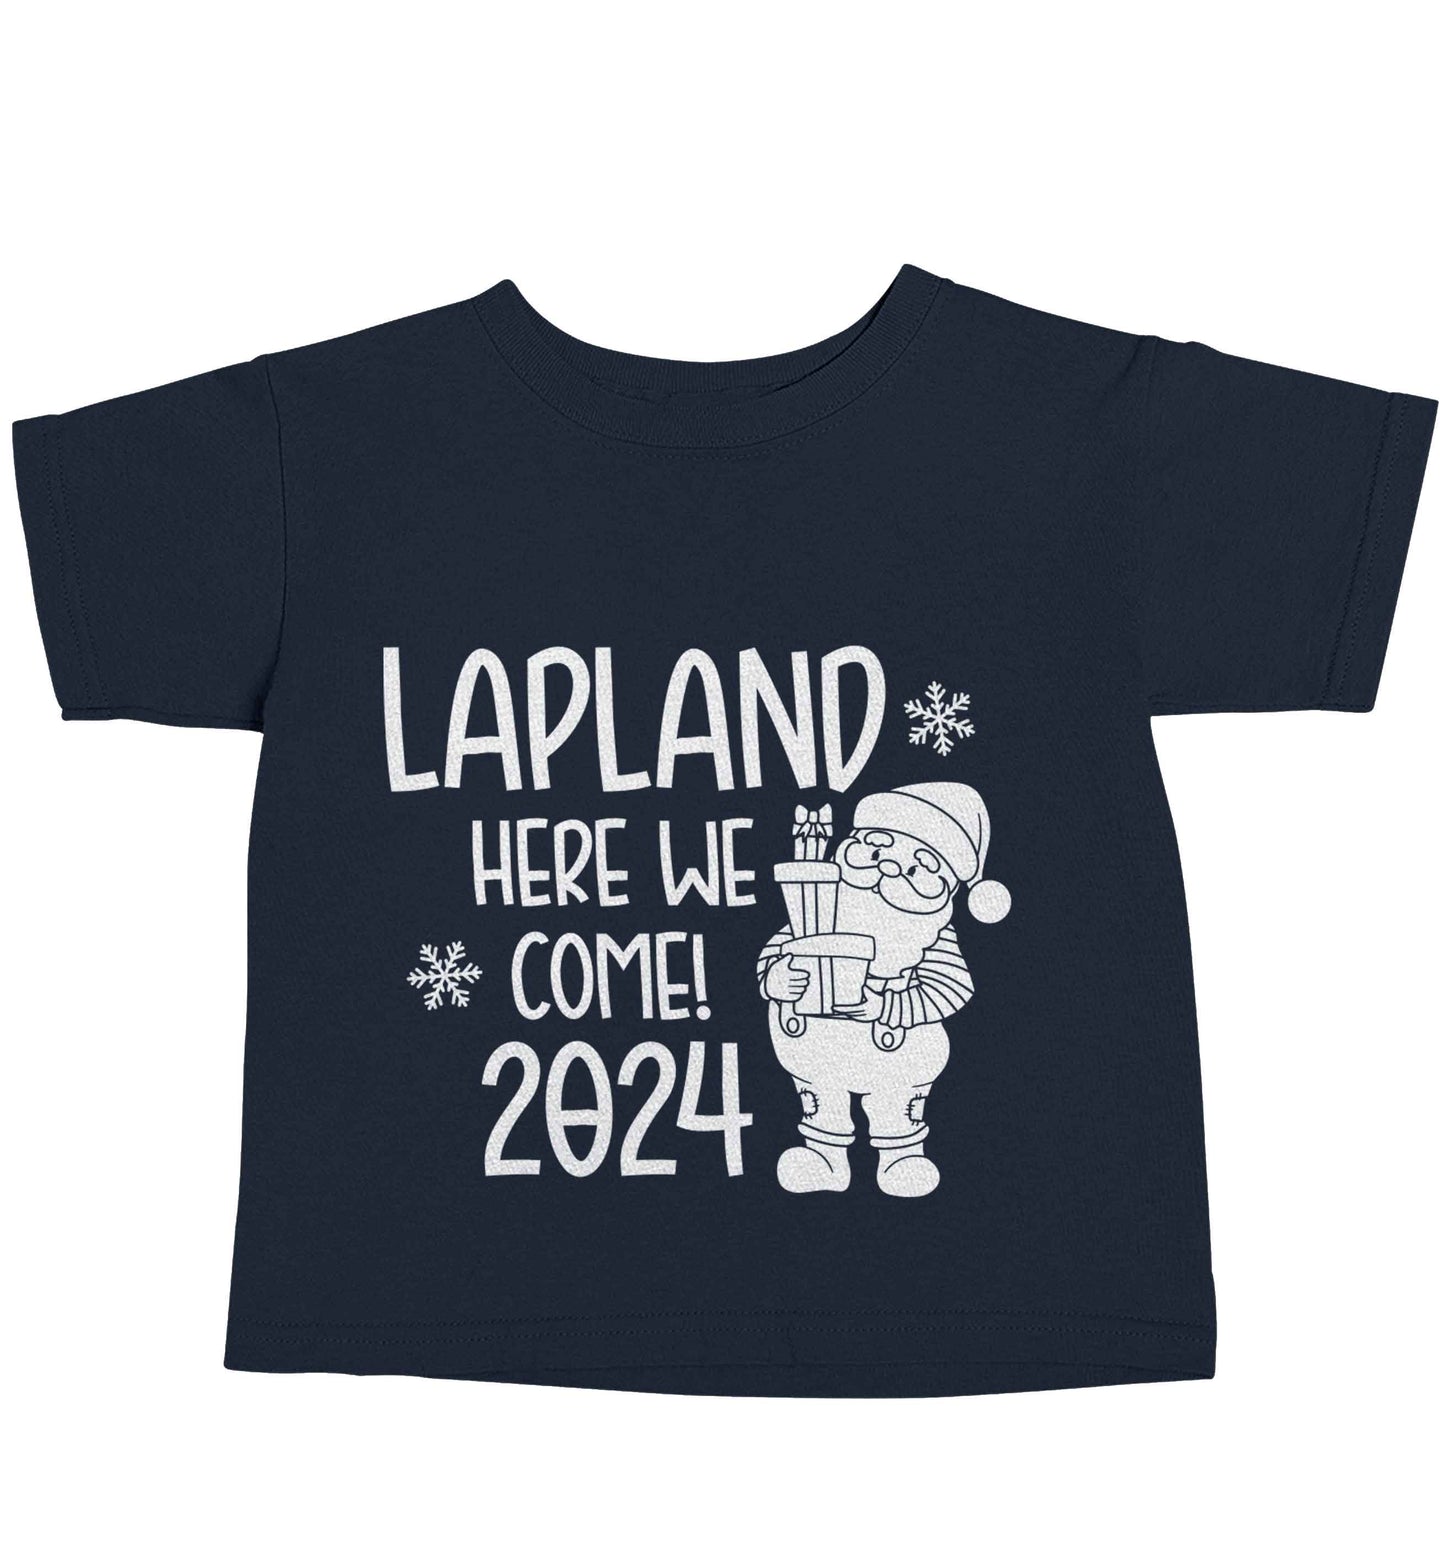 Lapland here we come navy baby toddler Tshirt 2 Years